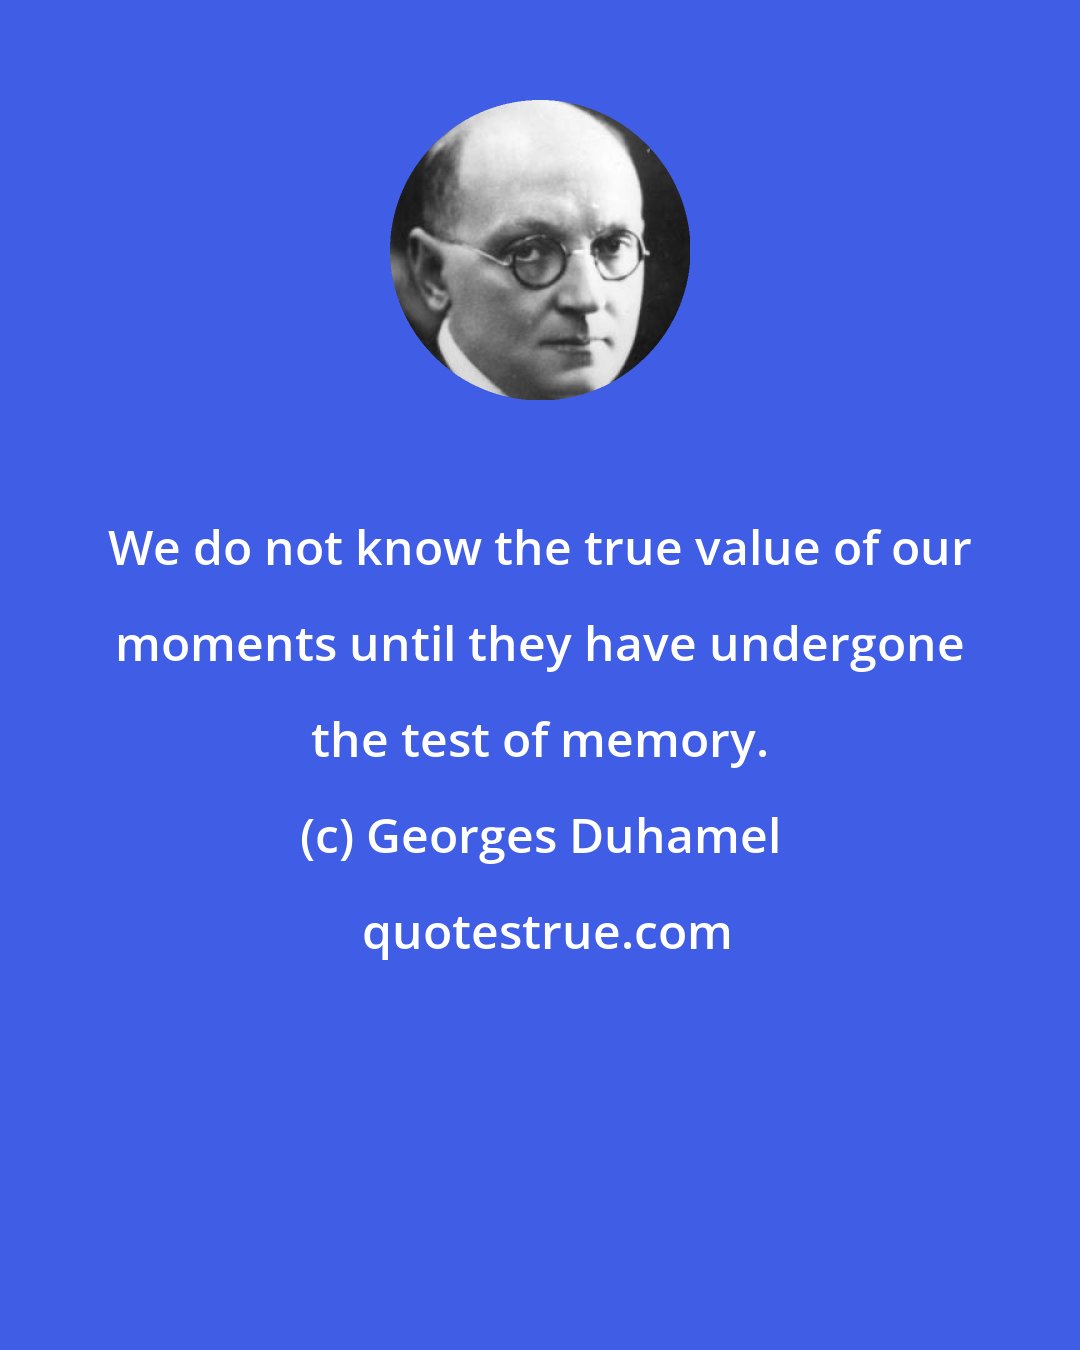 Georges Duhamel: We do not know the true value of our moments until they have undergone the test of memory.